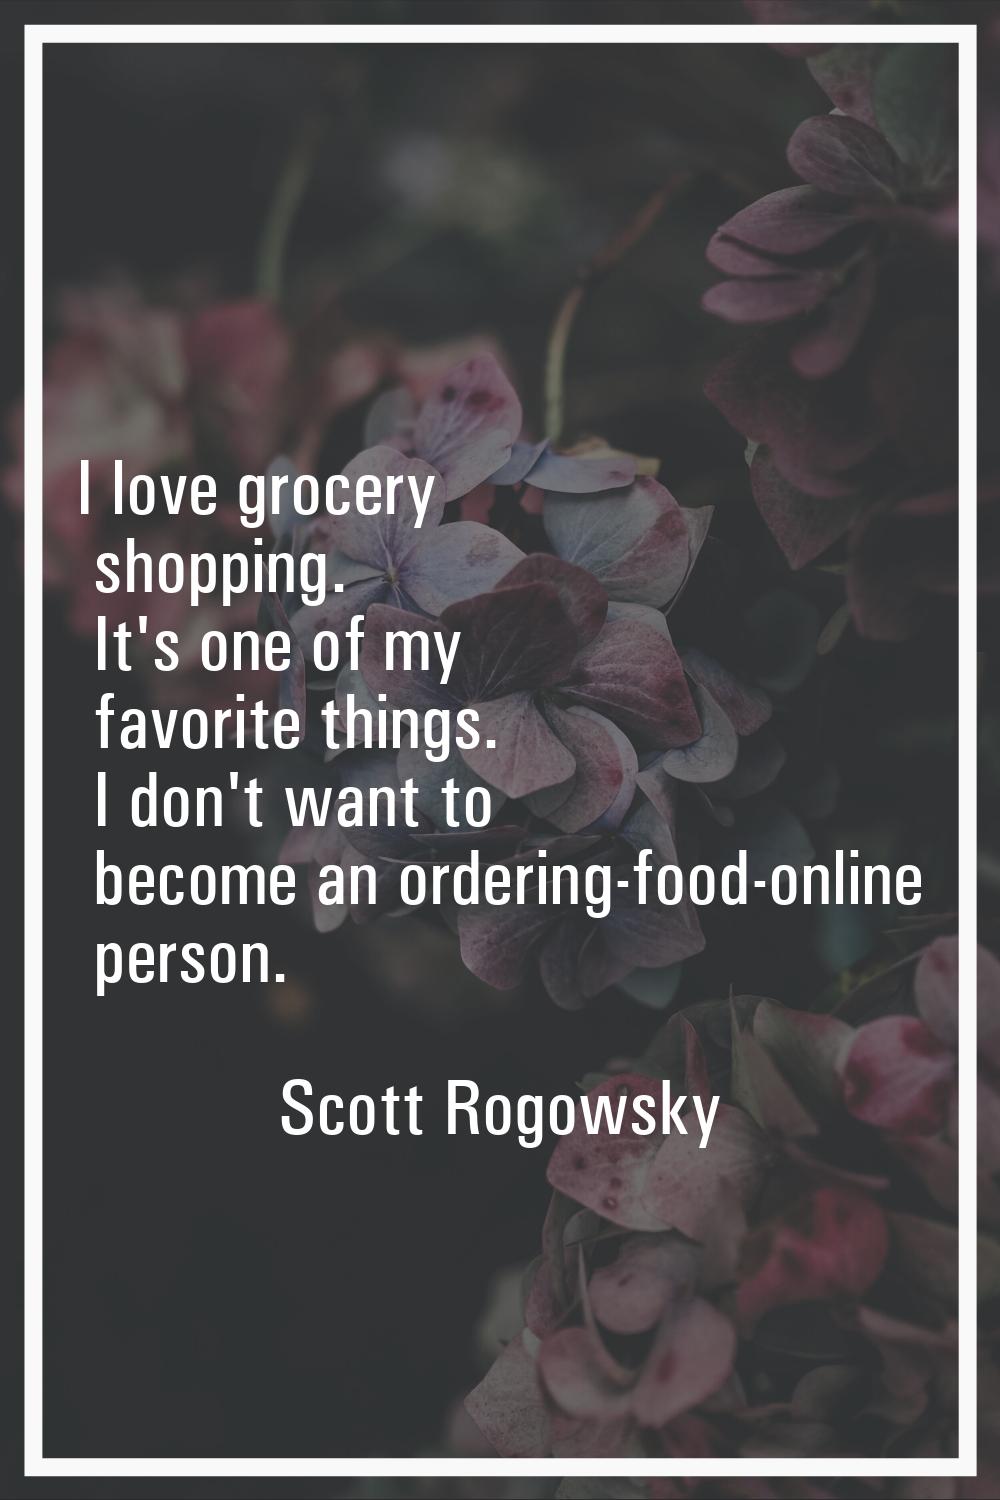 I love grocery shopping. It's one of my favorite things. I don't want to become an ordering-food-on